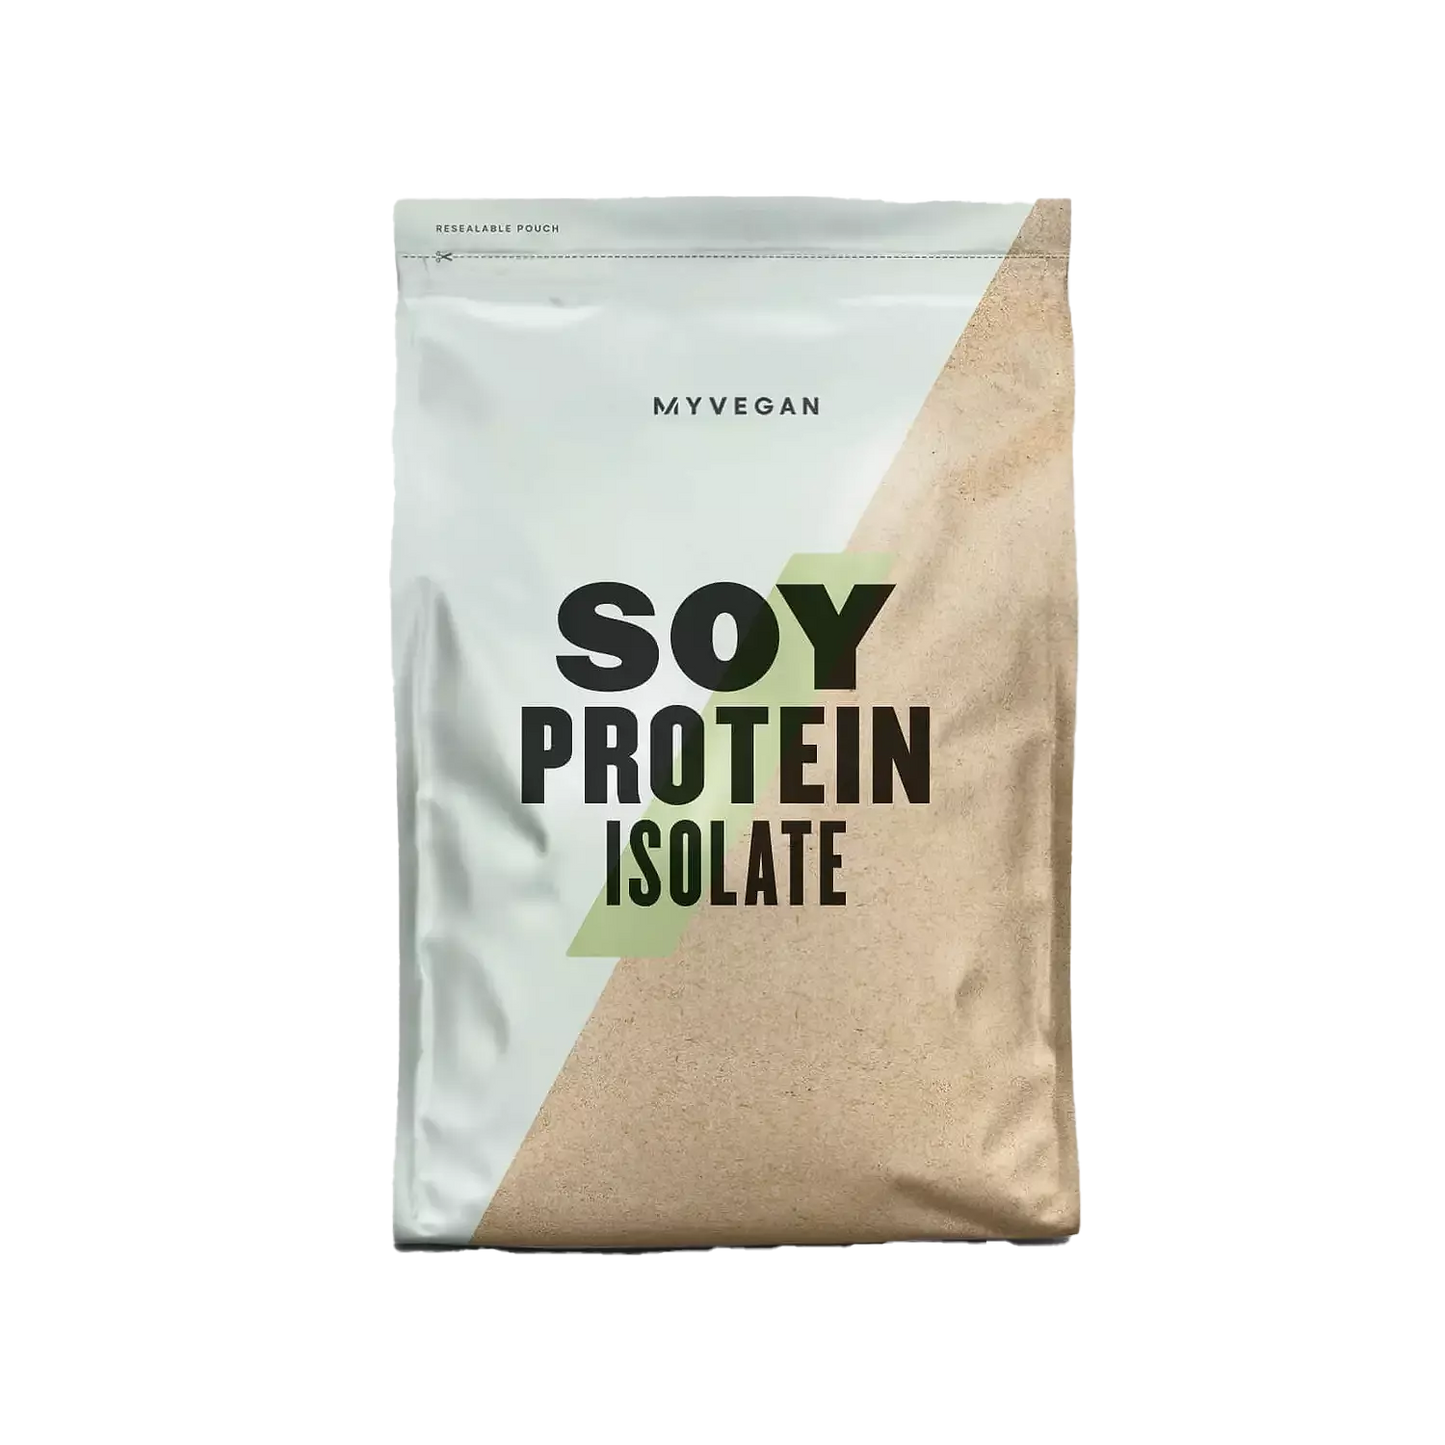 MYPROTEIN Soy Protein Isolate (1 kg)